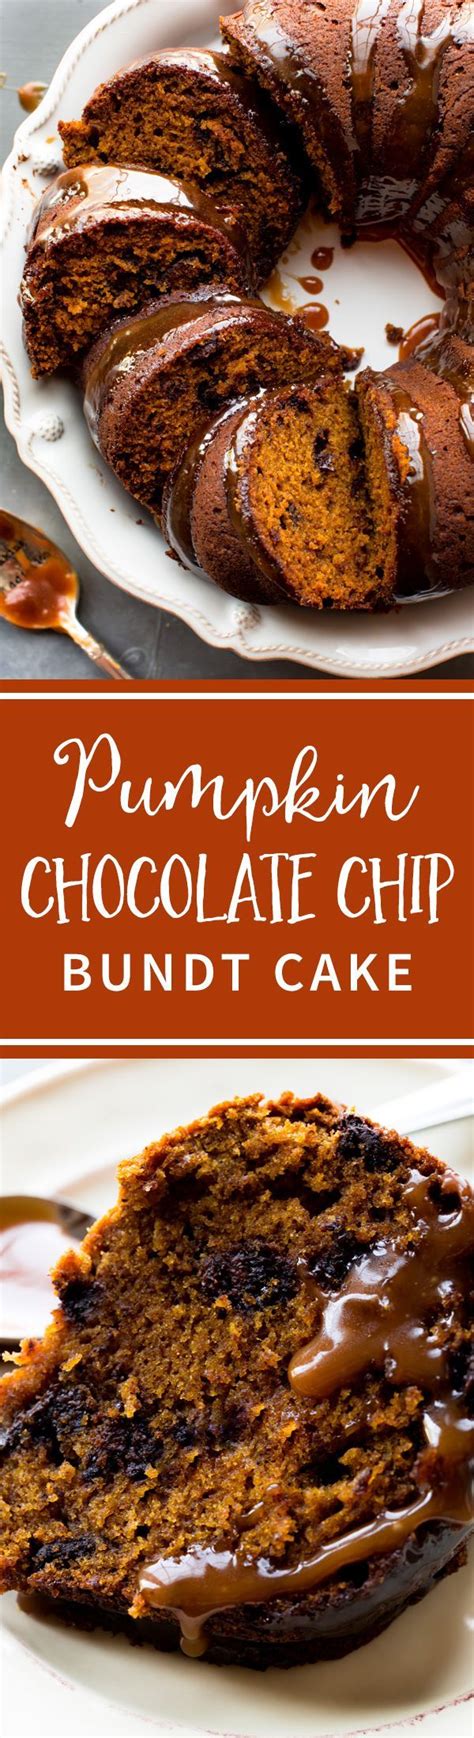 Deliciously Moist Pumpkin Bundt Cake With Chocolate Chips And Caramel